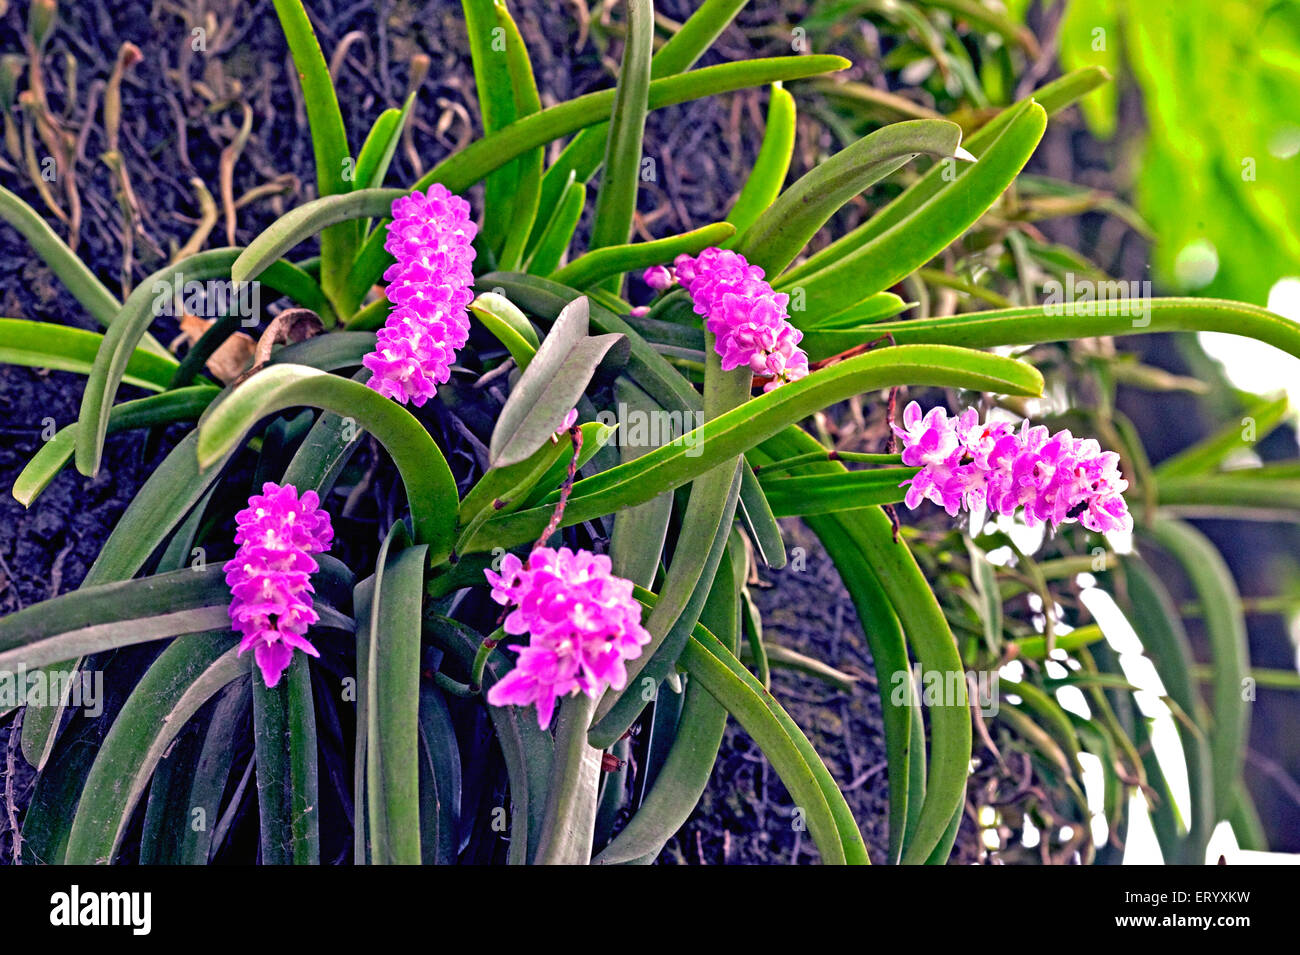 Rhynchostylis retusa, foxtail orchid, flowers blooming, Kalimpong, West Bengal, India, Asia Stock Photo